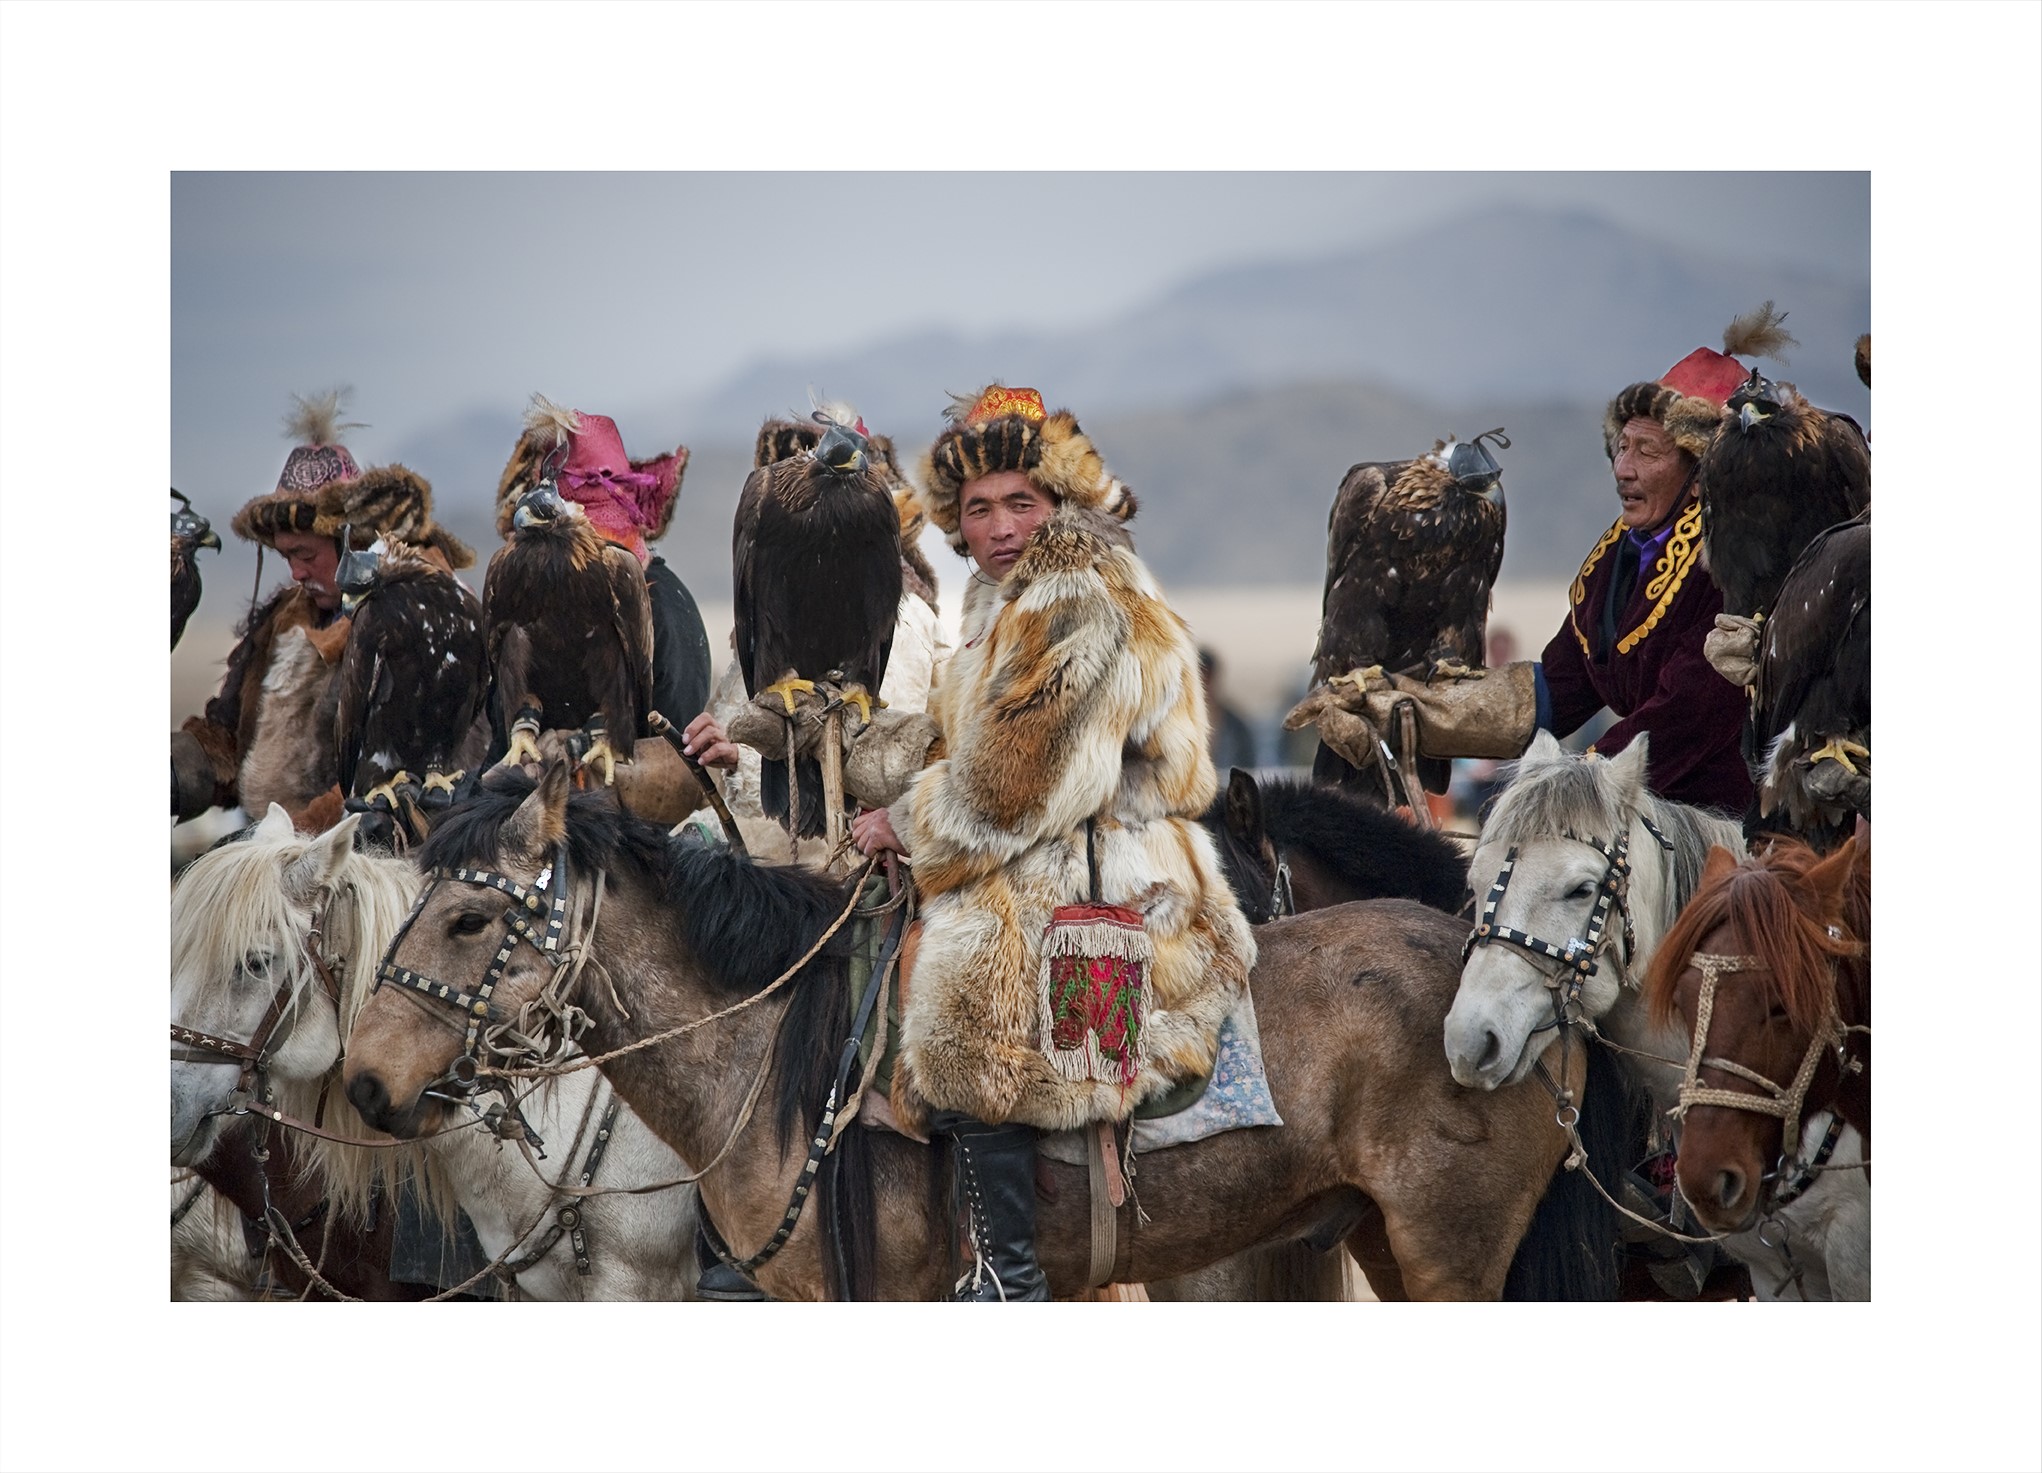 Soaring: The Golden Eagle Festival of Mongolia | Willoughby City Council